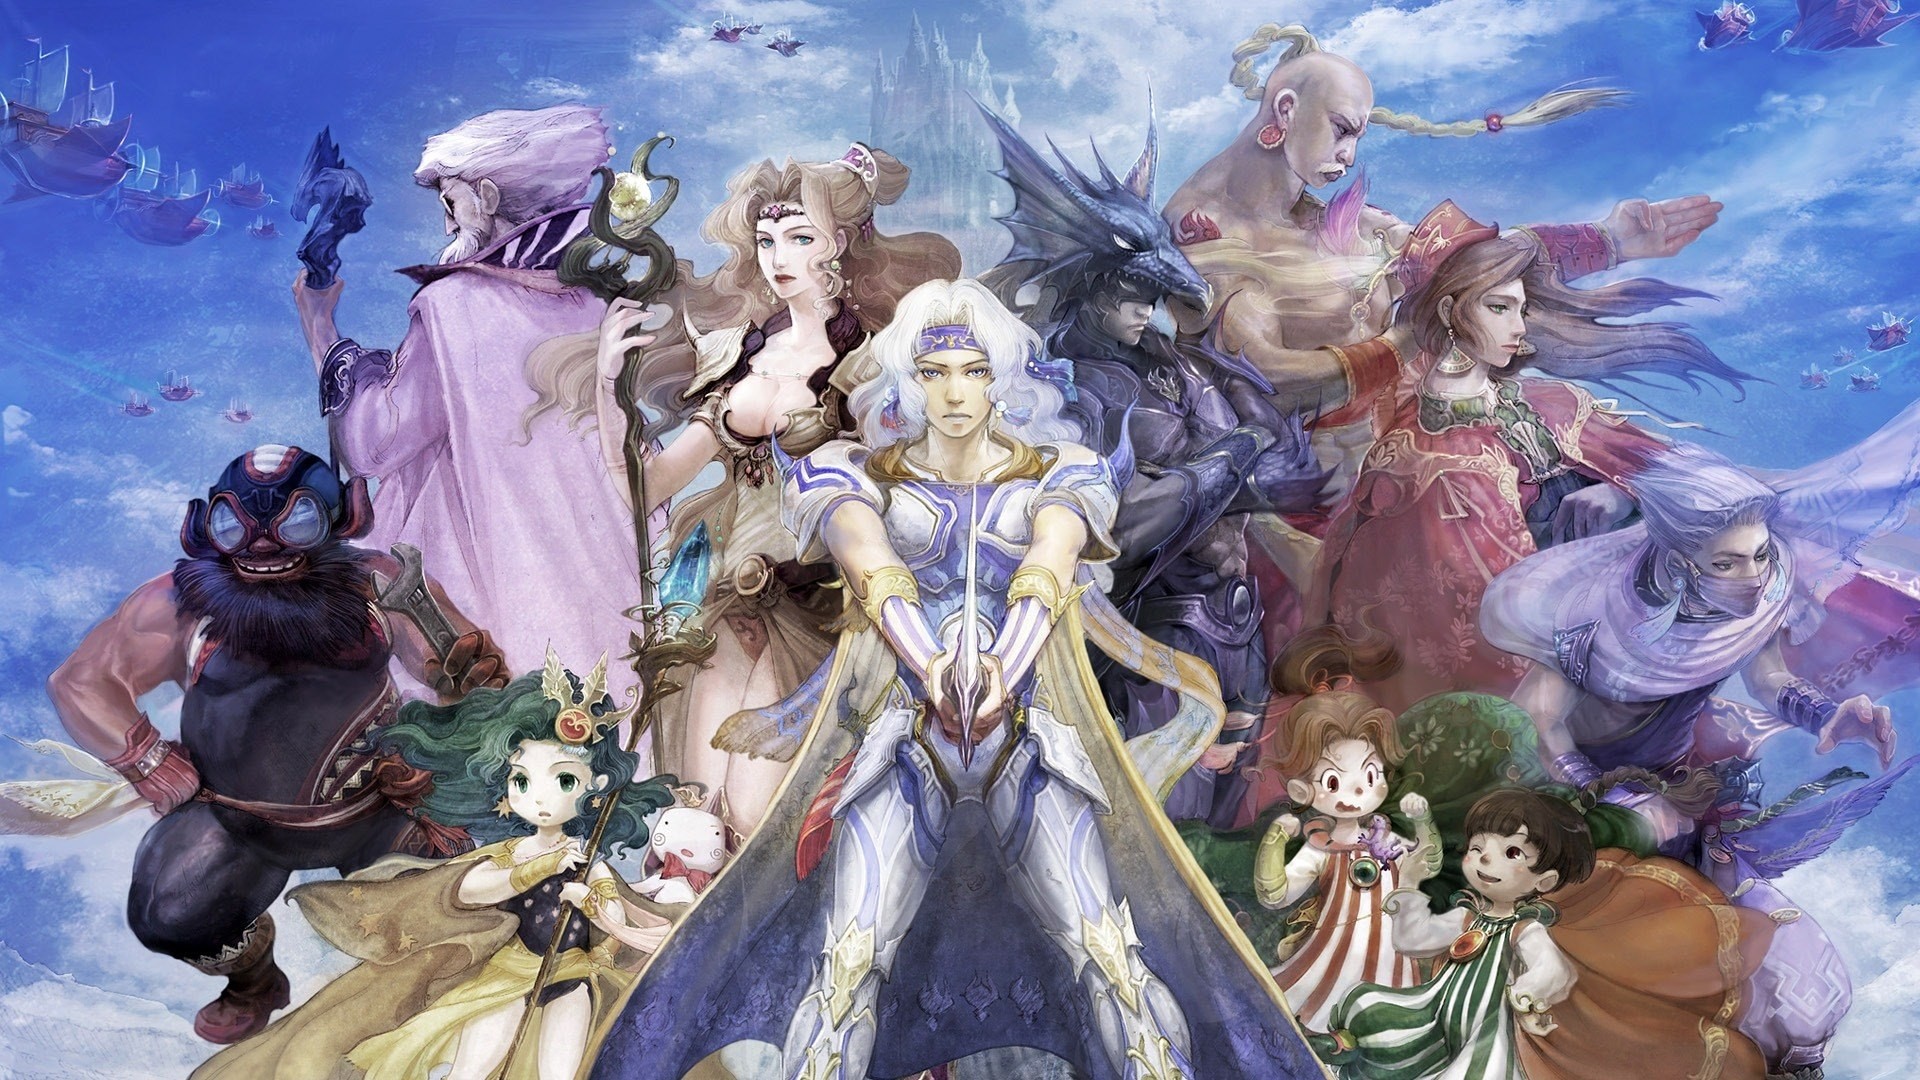 1920x1080 2 Final Fantasy IV Advance HD Wallpapers | Backgrounds - Wallpaper Abyss